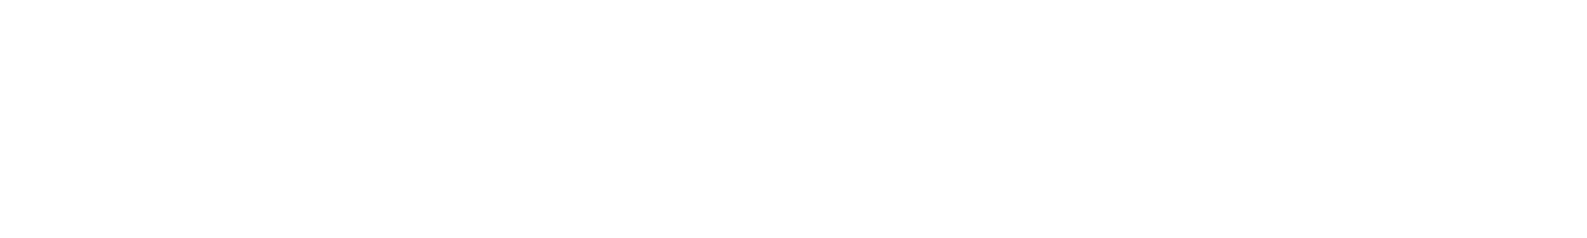 Stagwell logo grand pour les fonds sombres (PNG transparent)